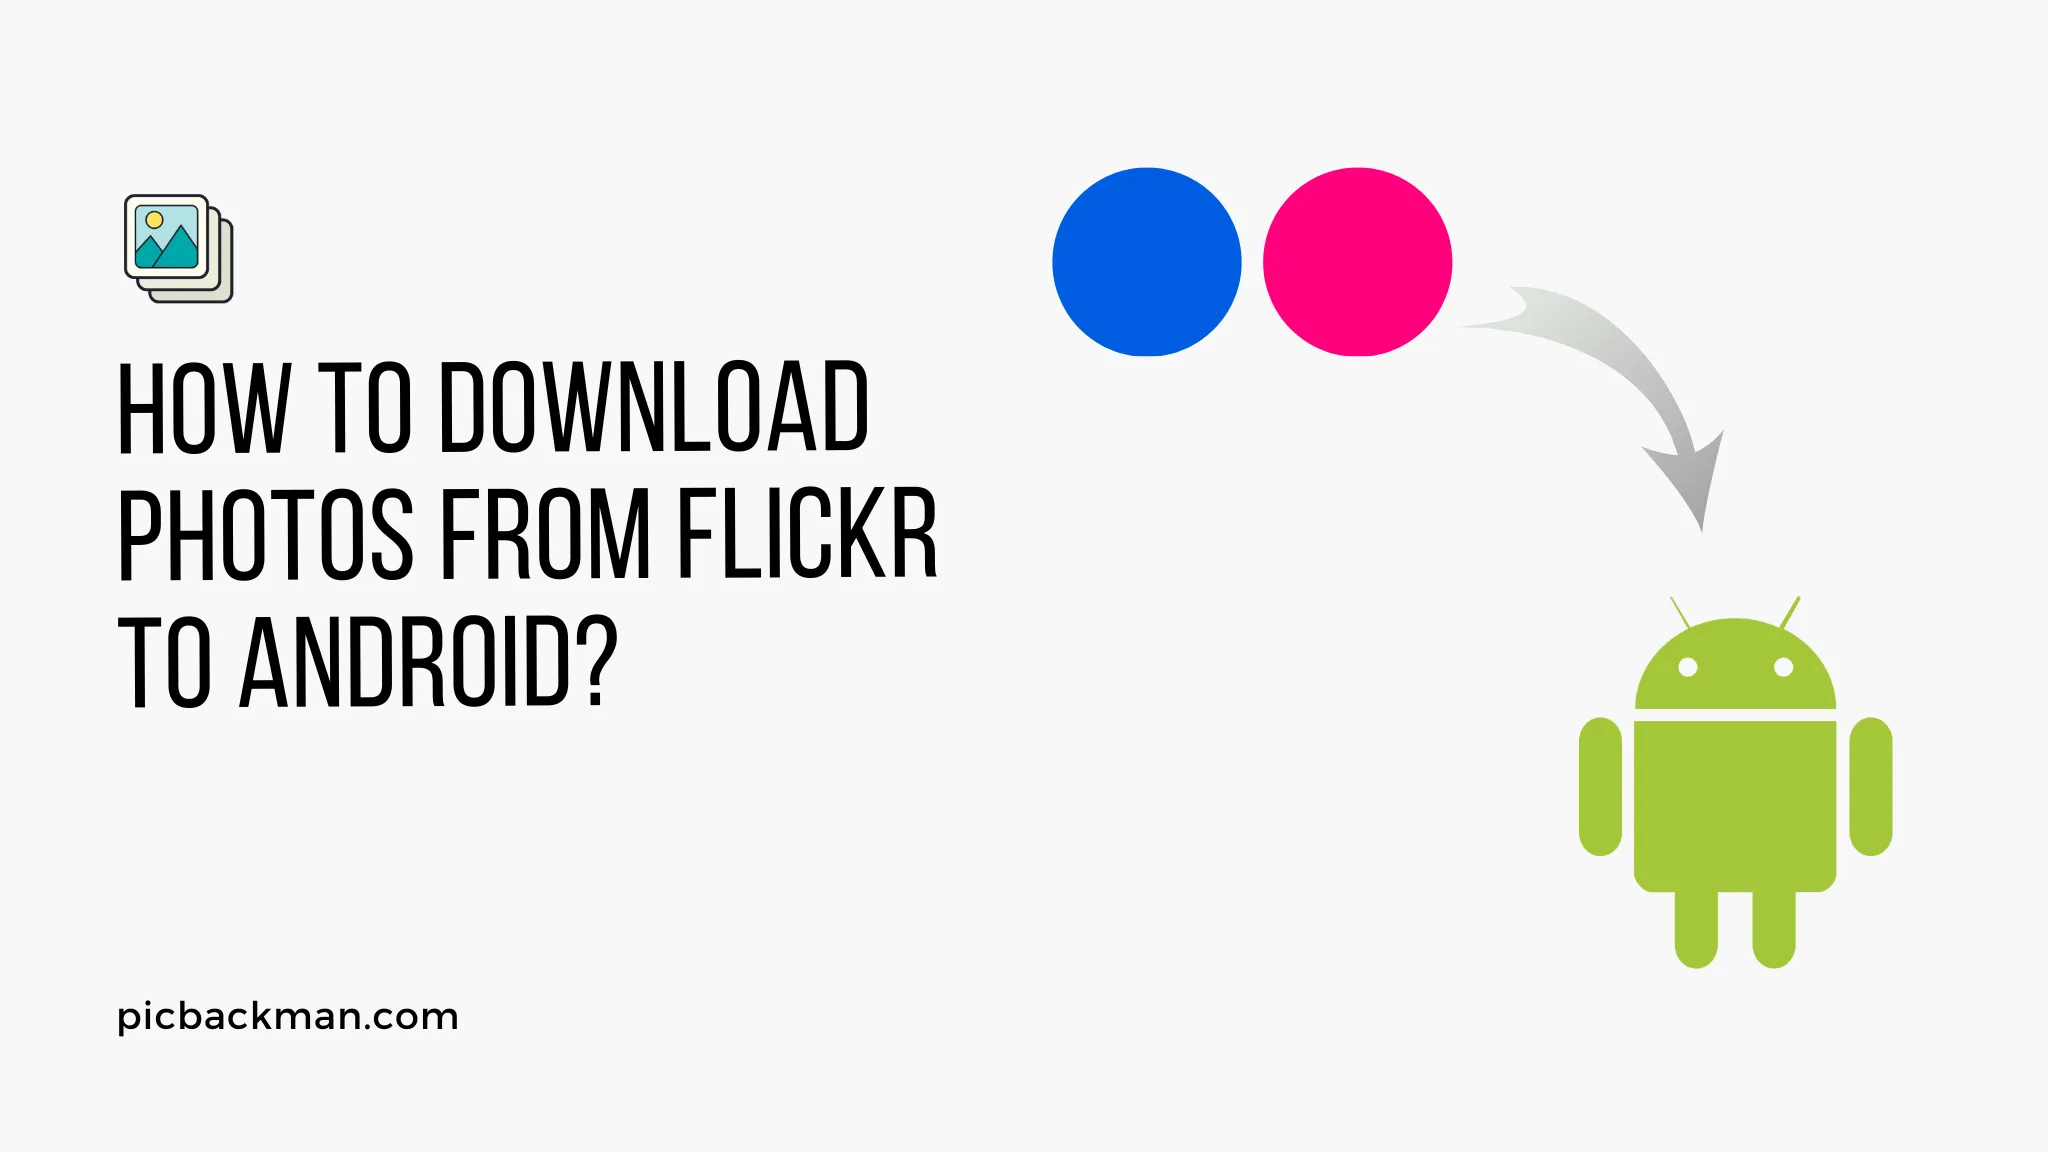 How to download photos from Flickr to Android?